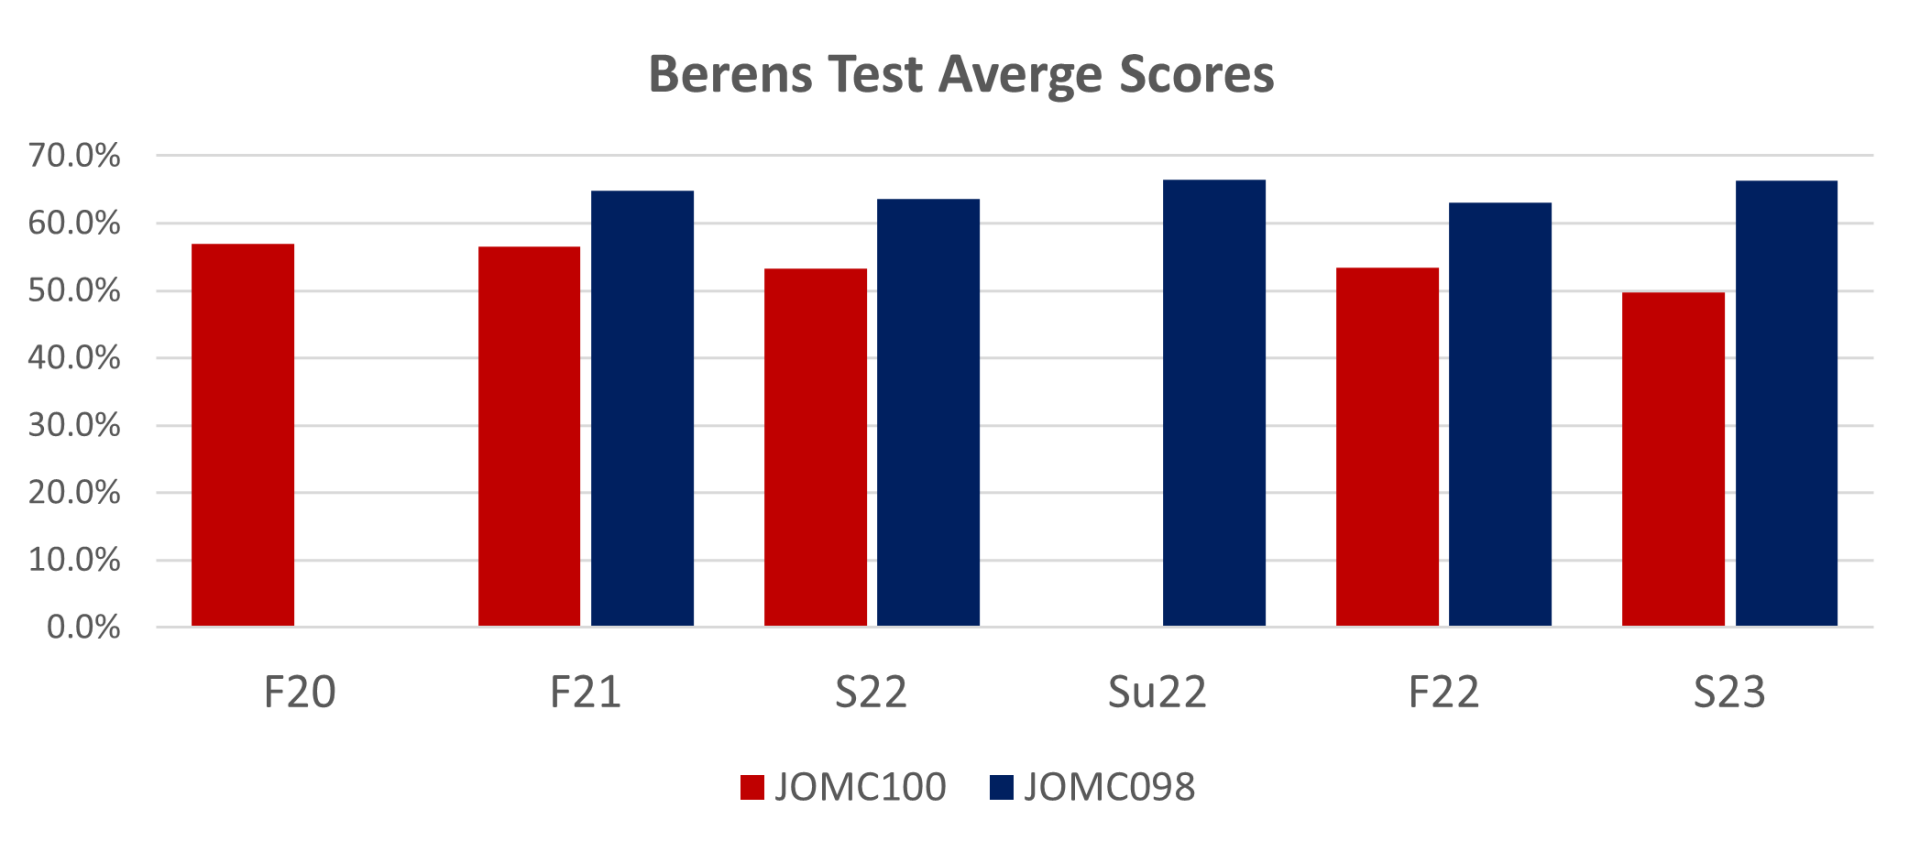 Bar graph of berens test results